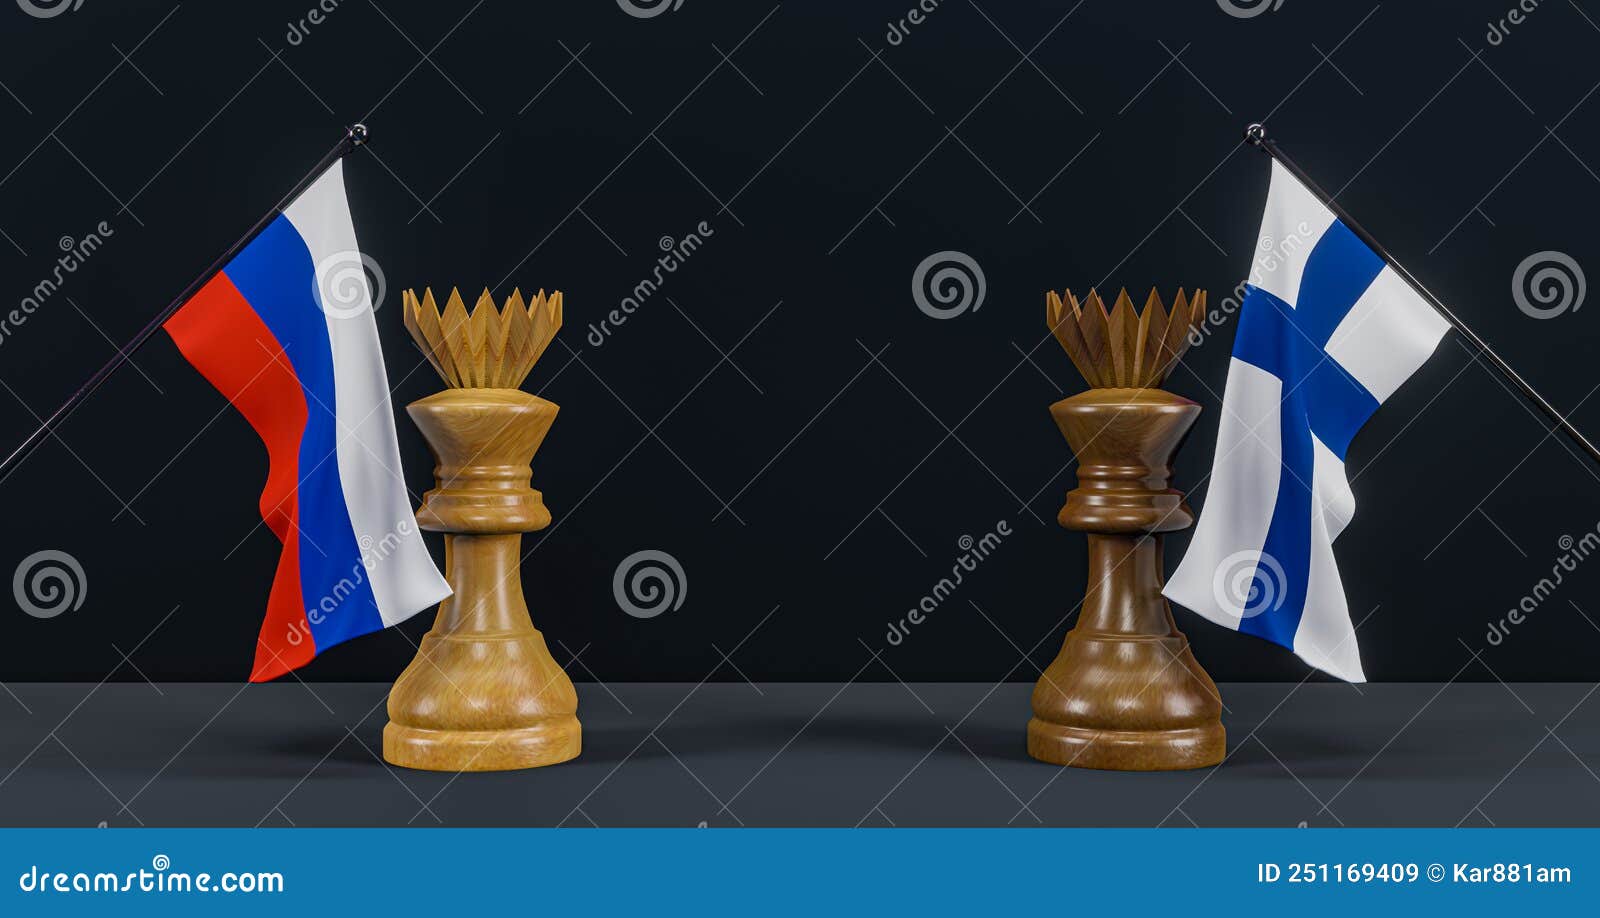 russia flag and finlandia flag and chess king on chessboard, russia vs finlandia countries political conflict and war concept, 3d